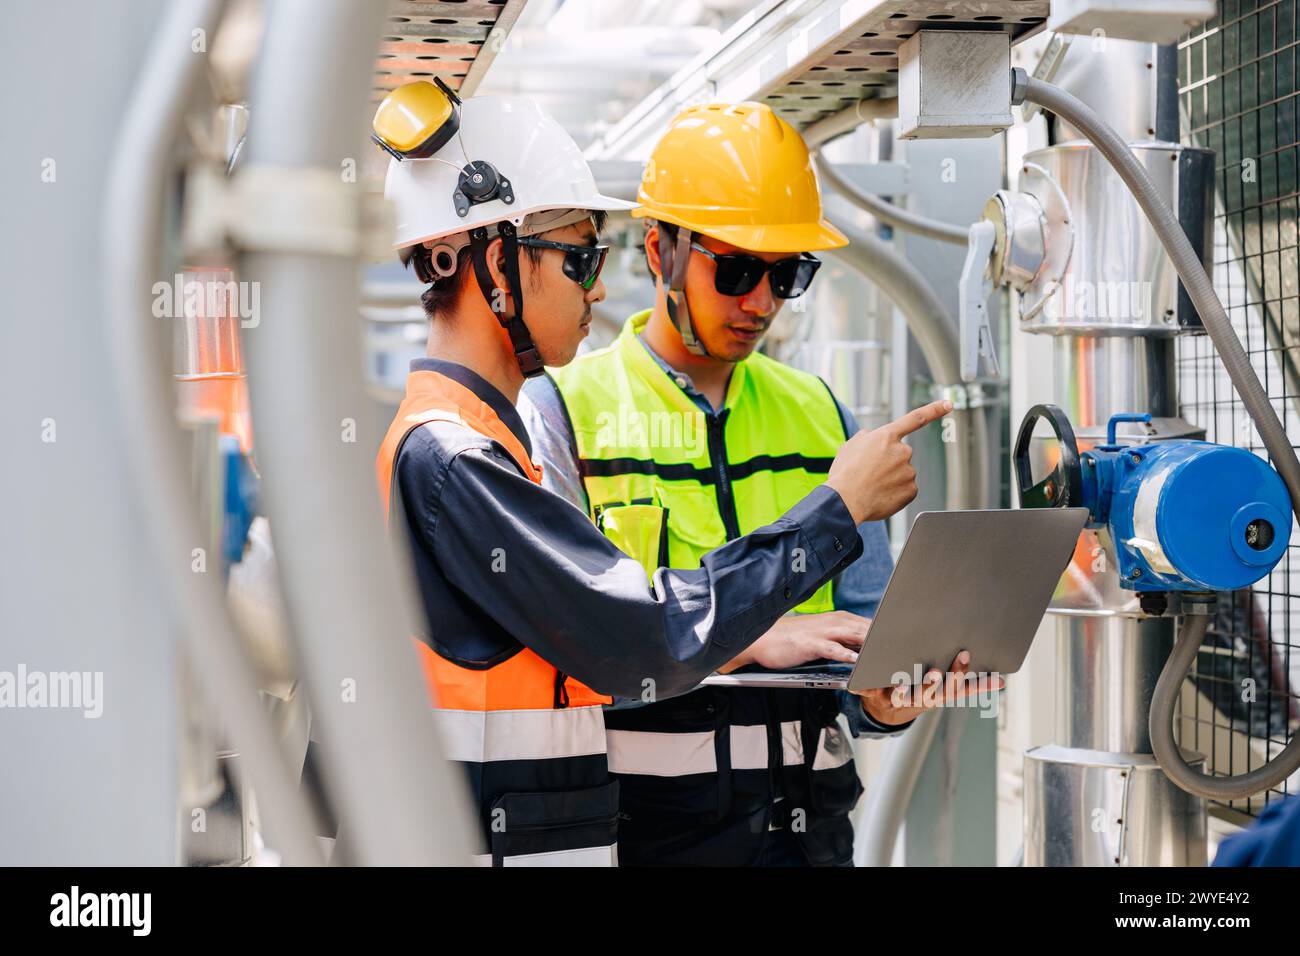 engineer man working with water pipe line in gas oil industry workplace Stock Photo